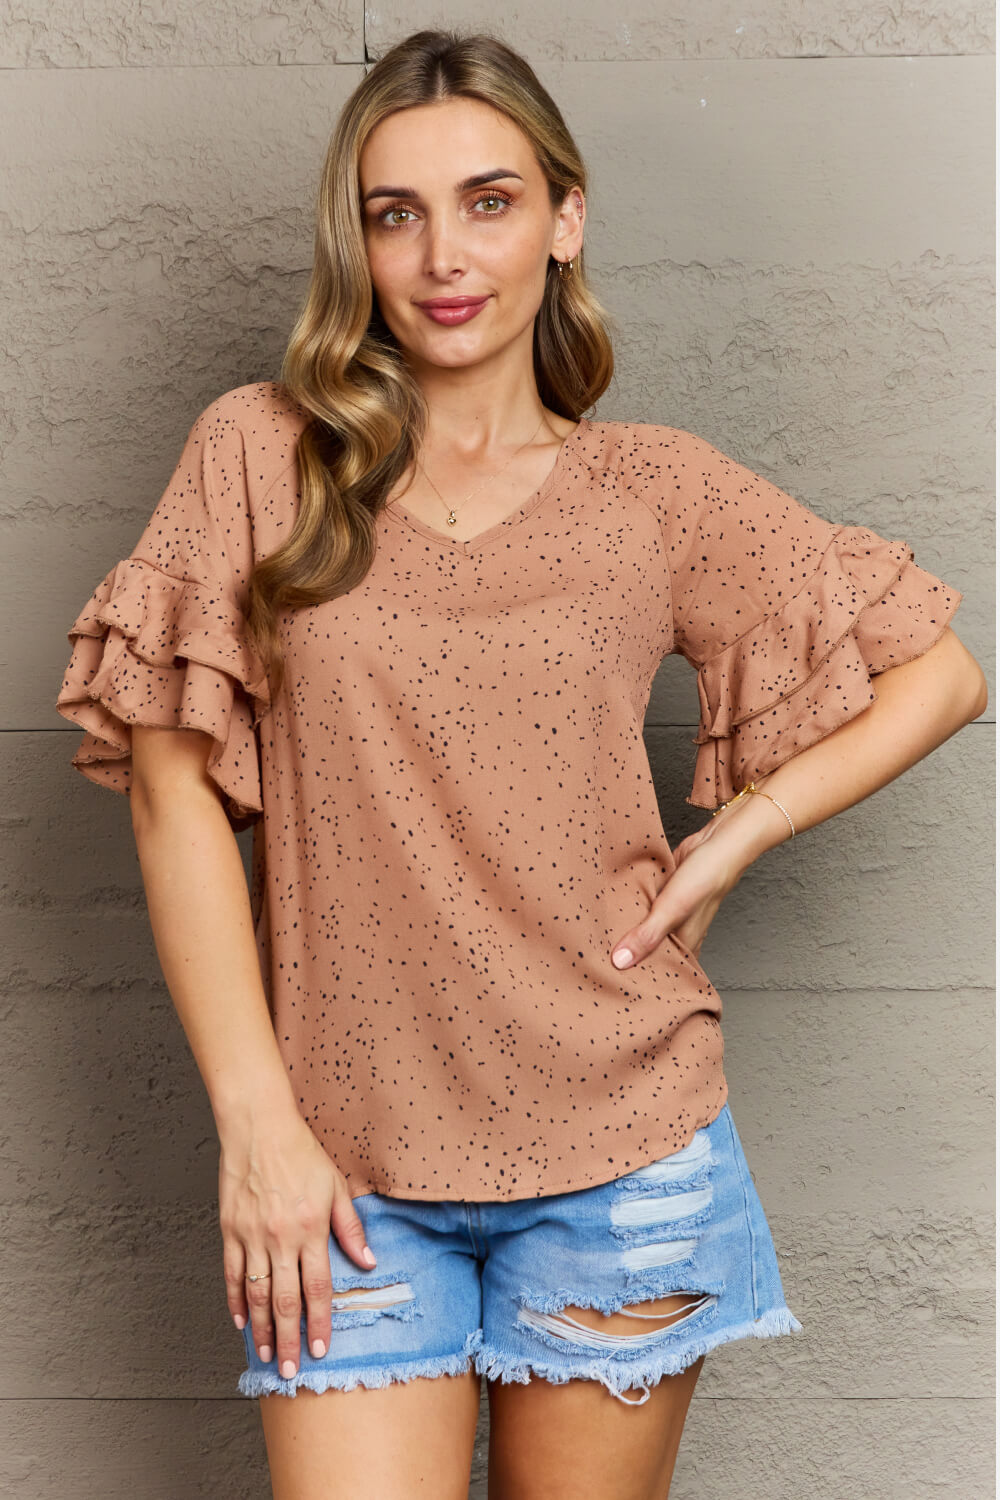 Darling Delights Polka Dot Woven Top - Brown / S - Women’s Clothing & Accessories - Shirts & Tops - 1 - 2024